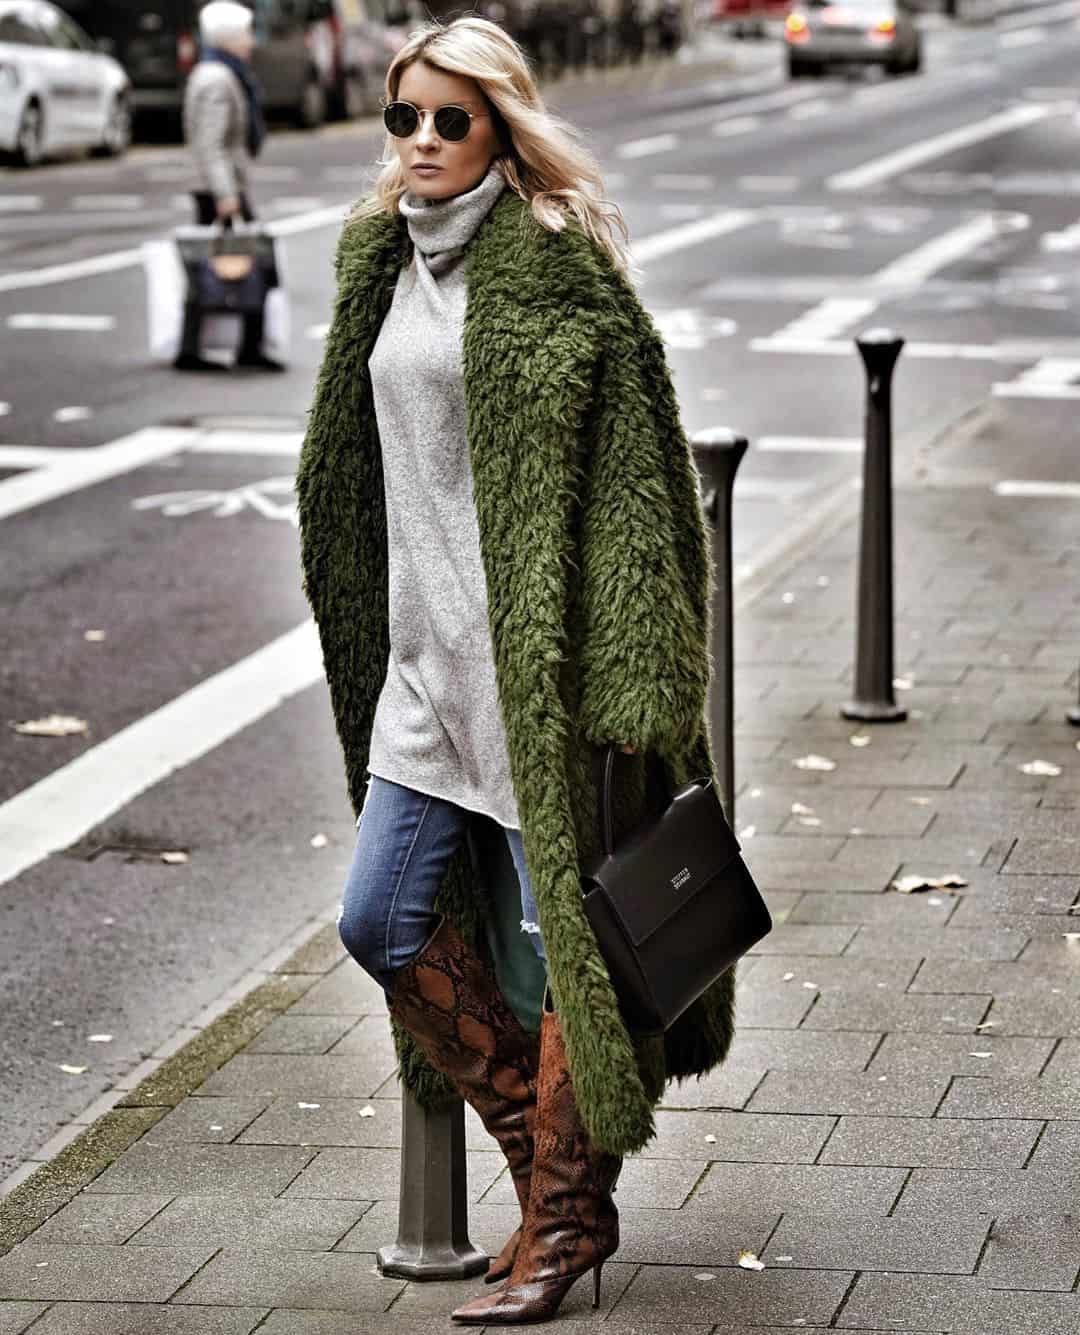 Street Style in All Colors by Gitta Banko